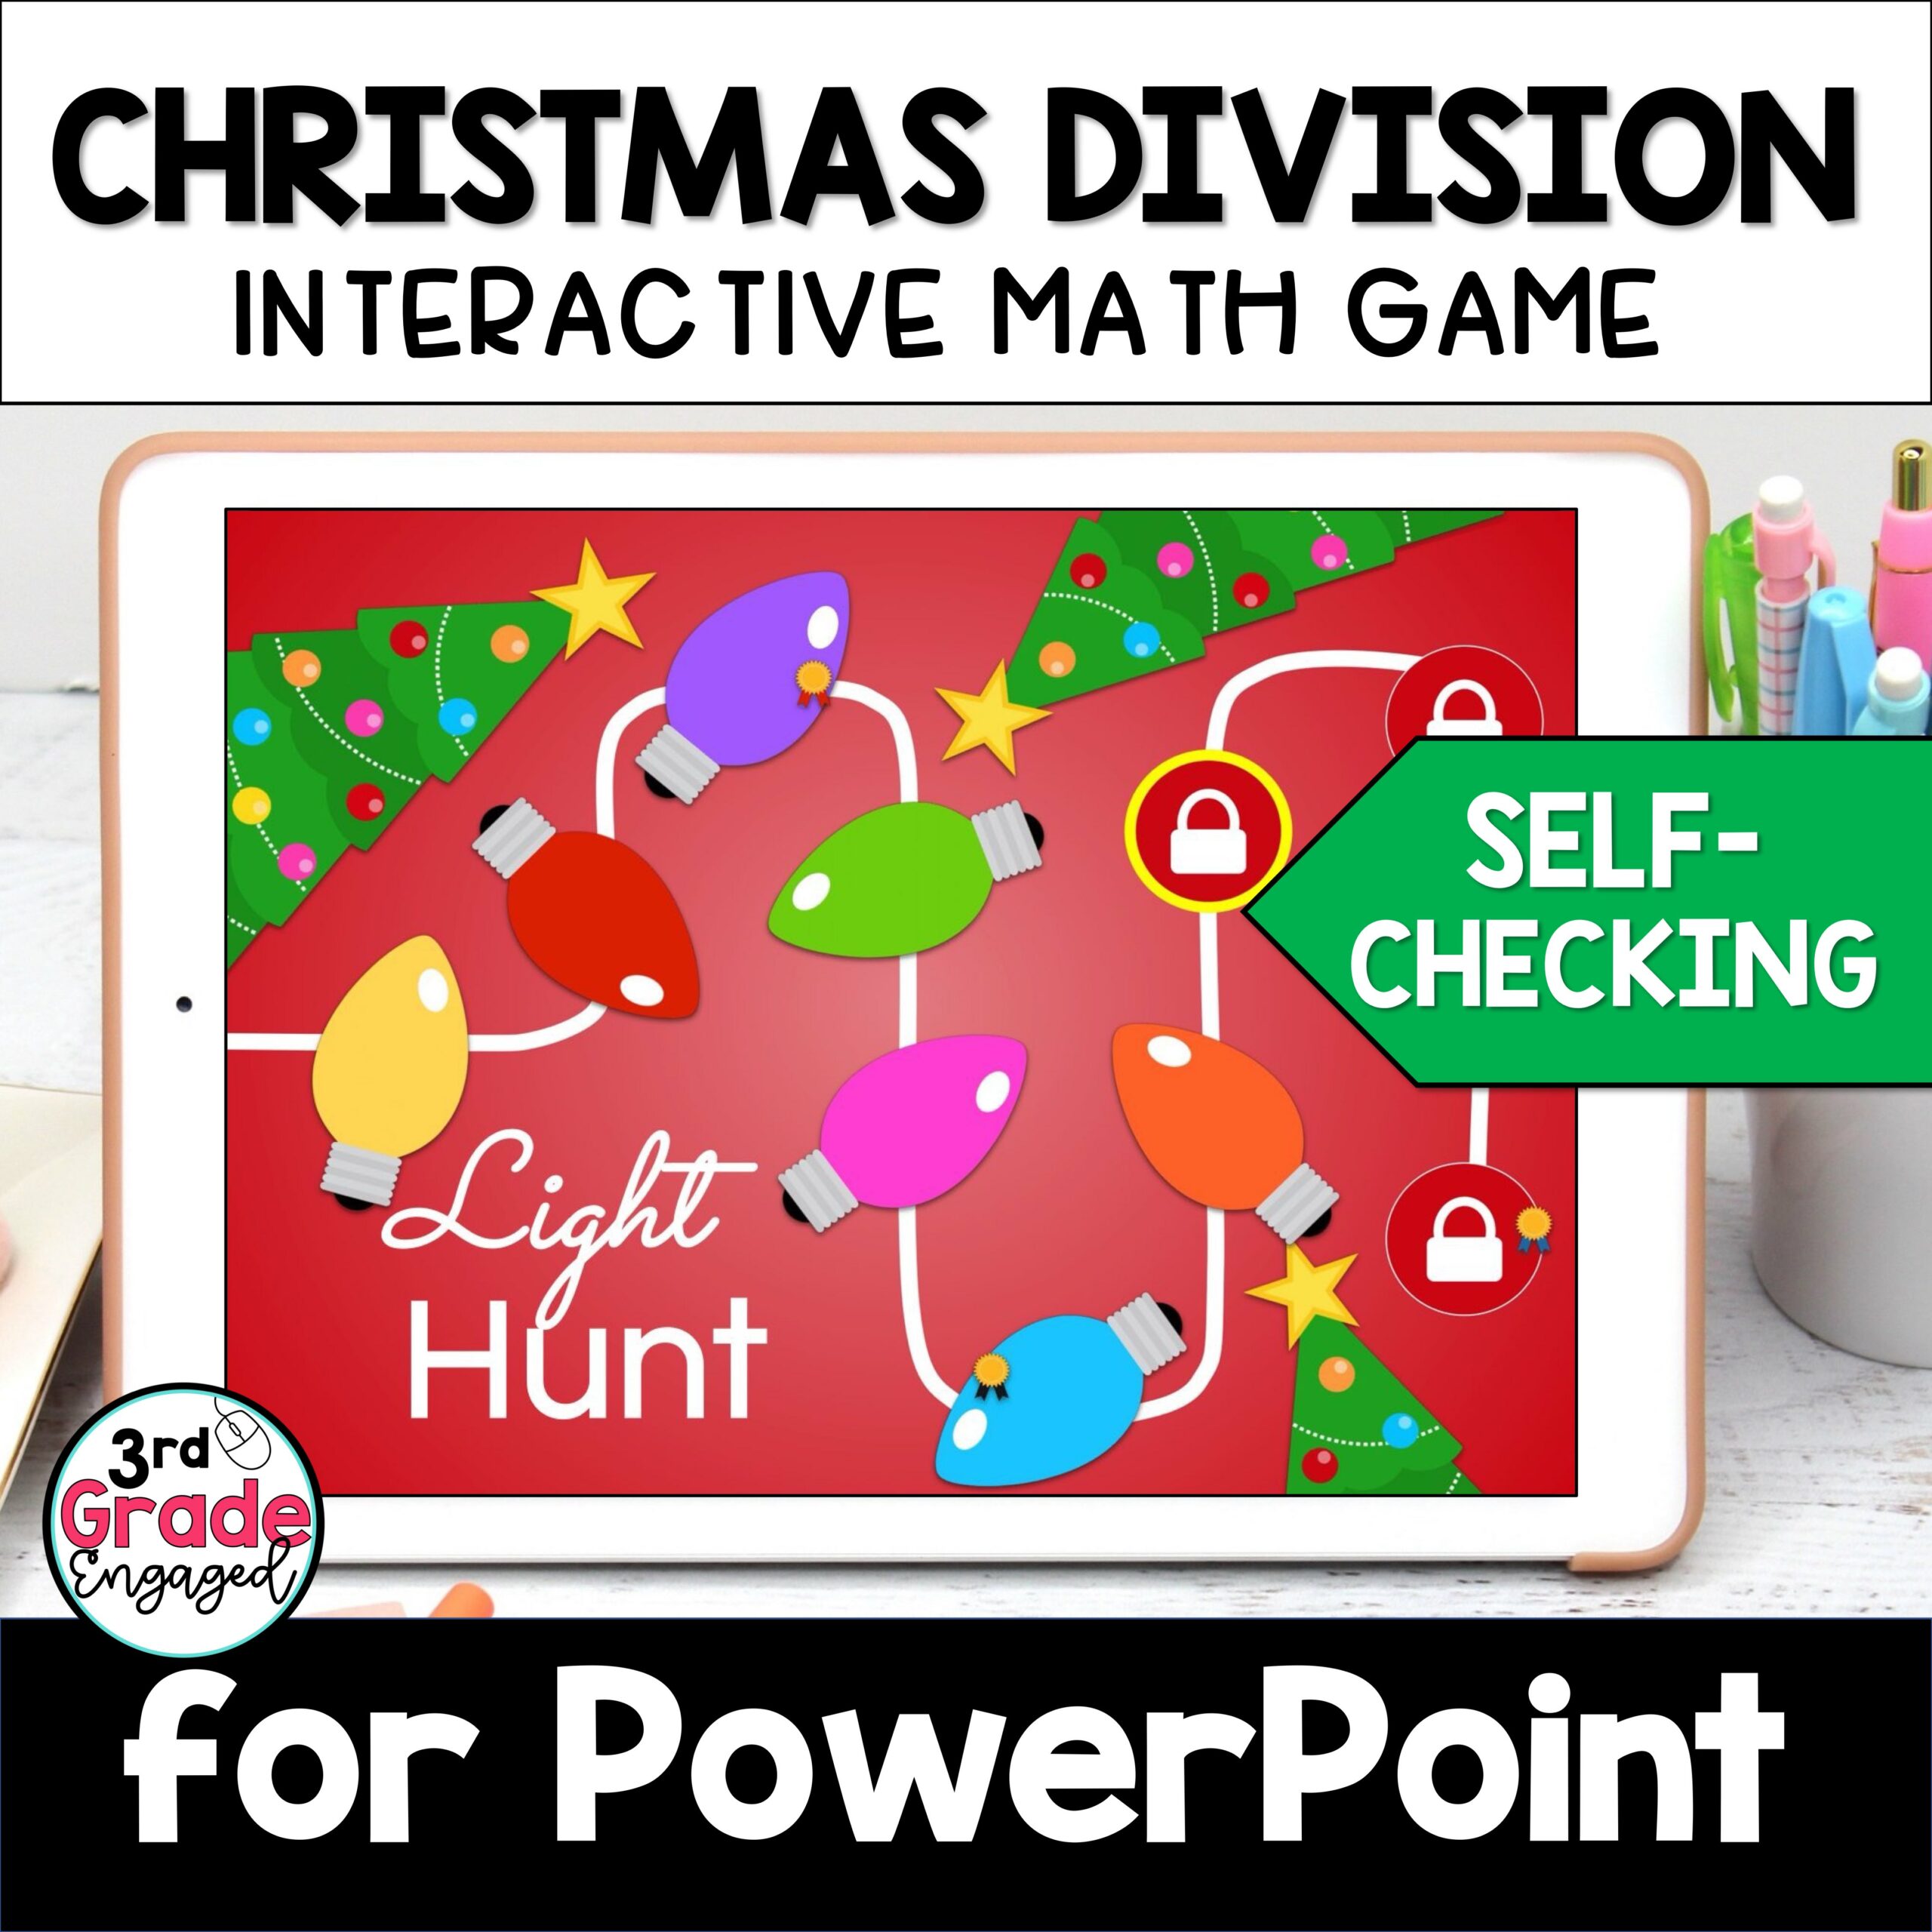 Christmas Division Game for PowerPoint ™'s featured image